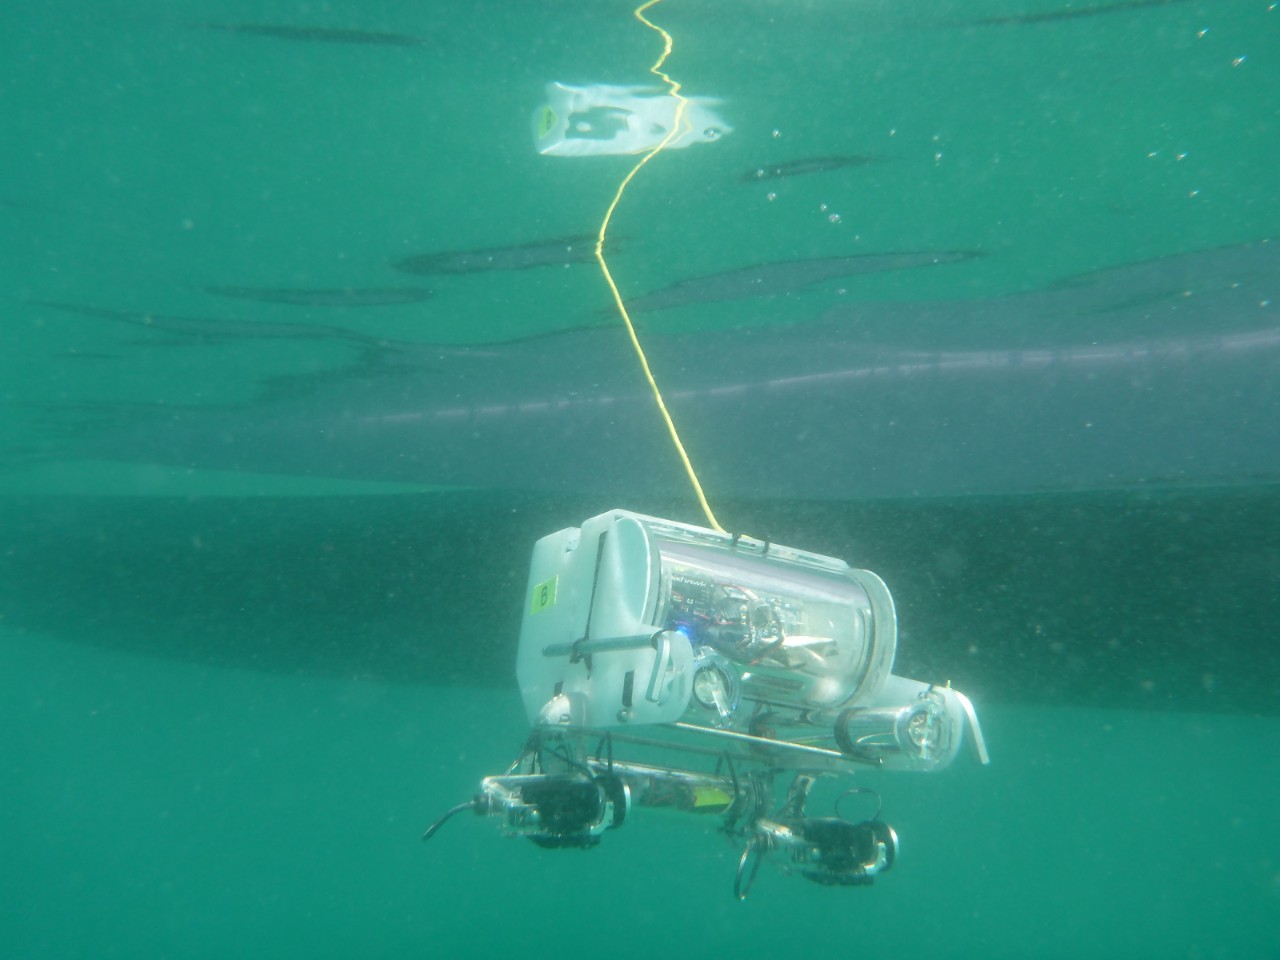 NYUAD students built an underwater drone to check on the health of Gulf coral reefs